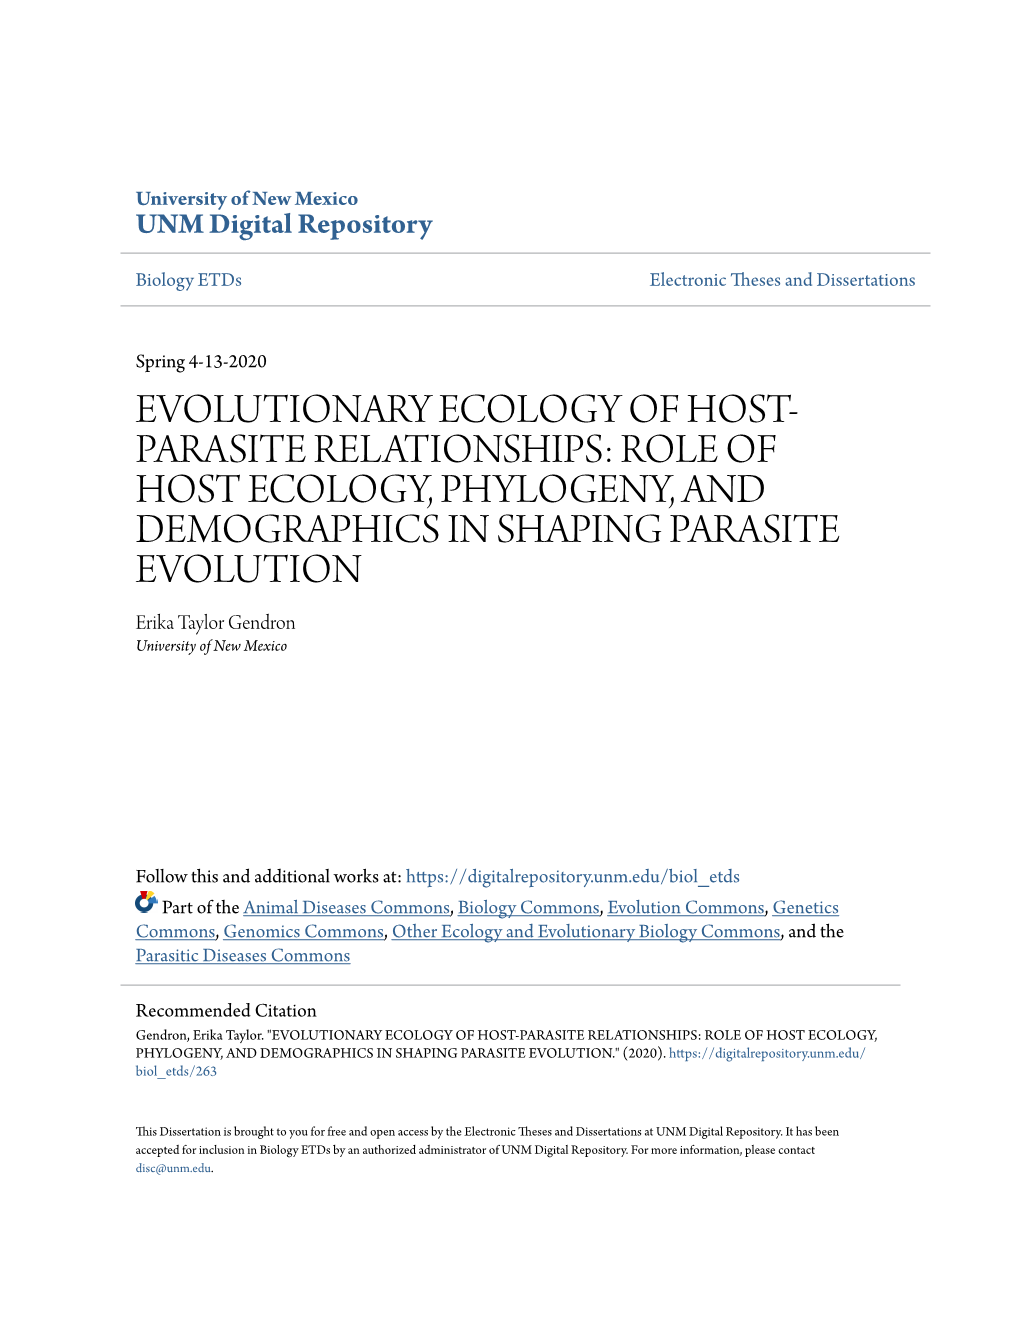 Evolutionary Ecology of Host-Parasite Relationships: Role of Host Ecology, Phylogeny, and Demographics in Shaping Parasite Evolution." (2020)